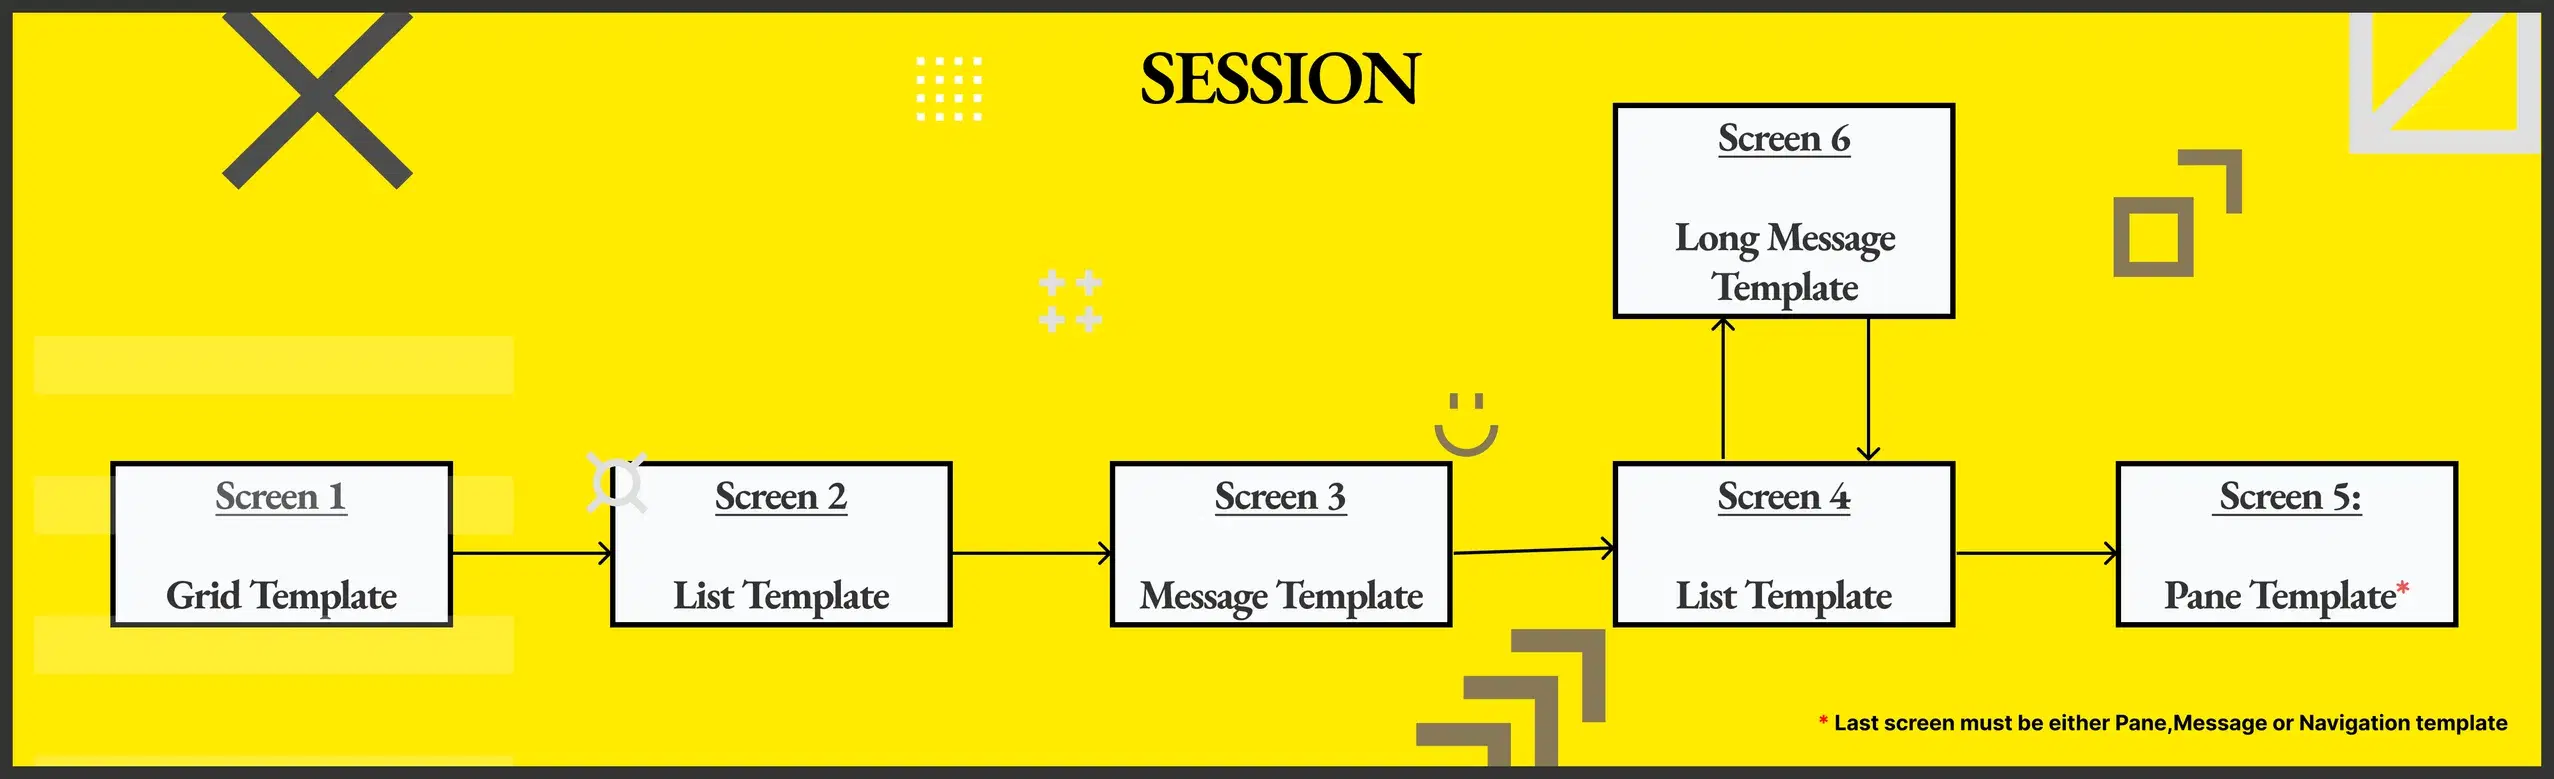 An example session in an Android Automotive app